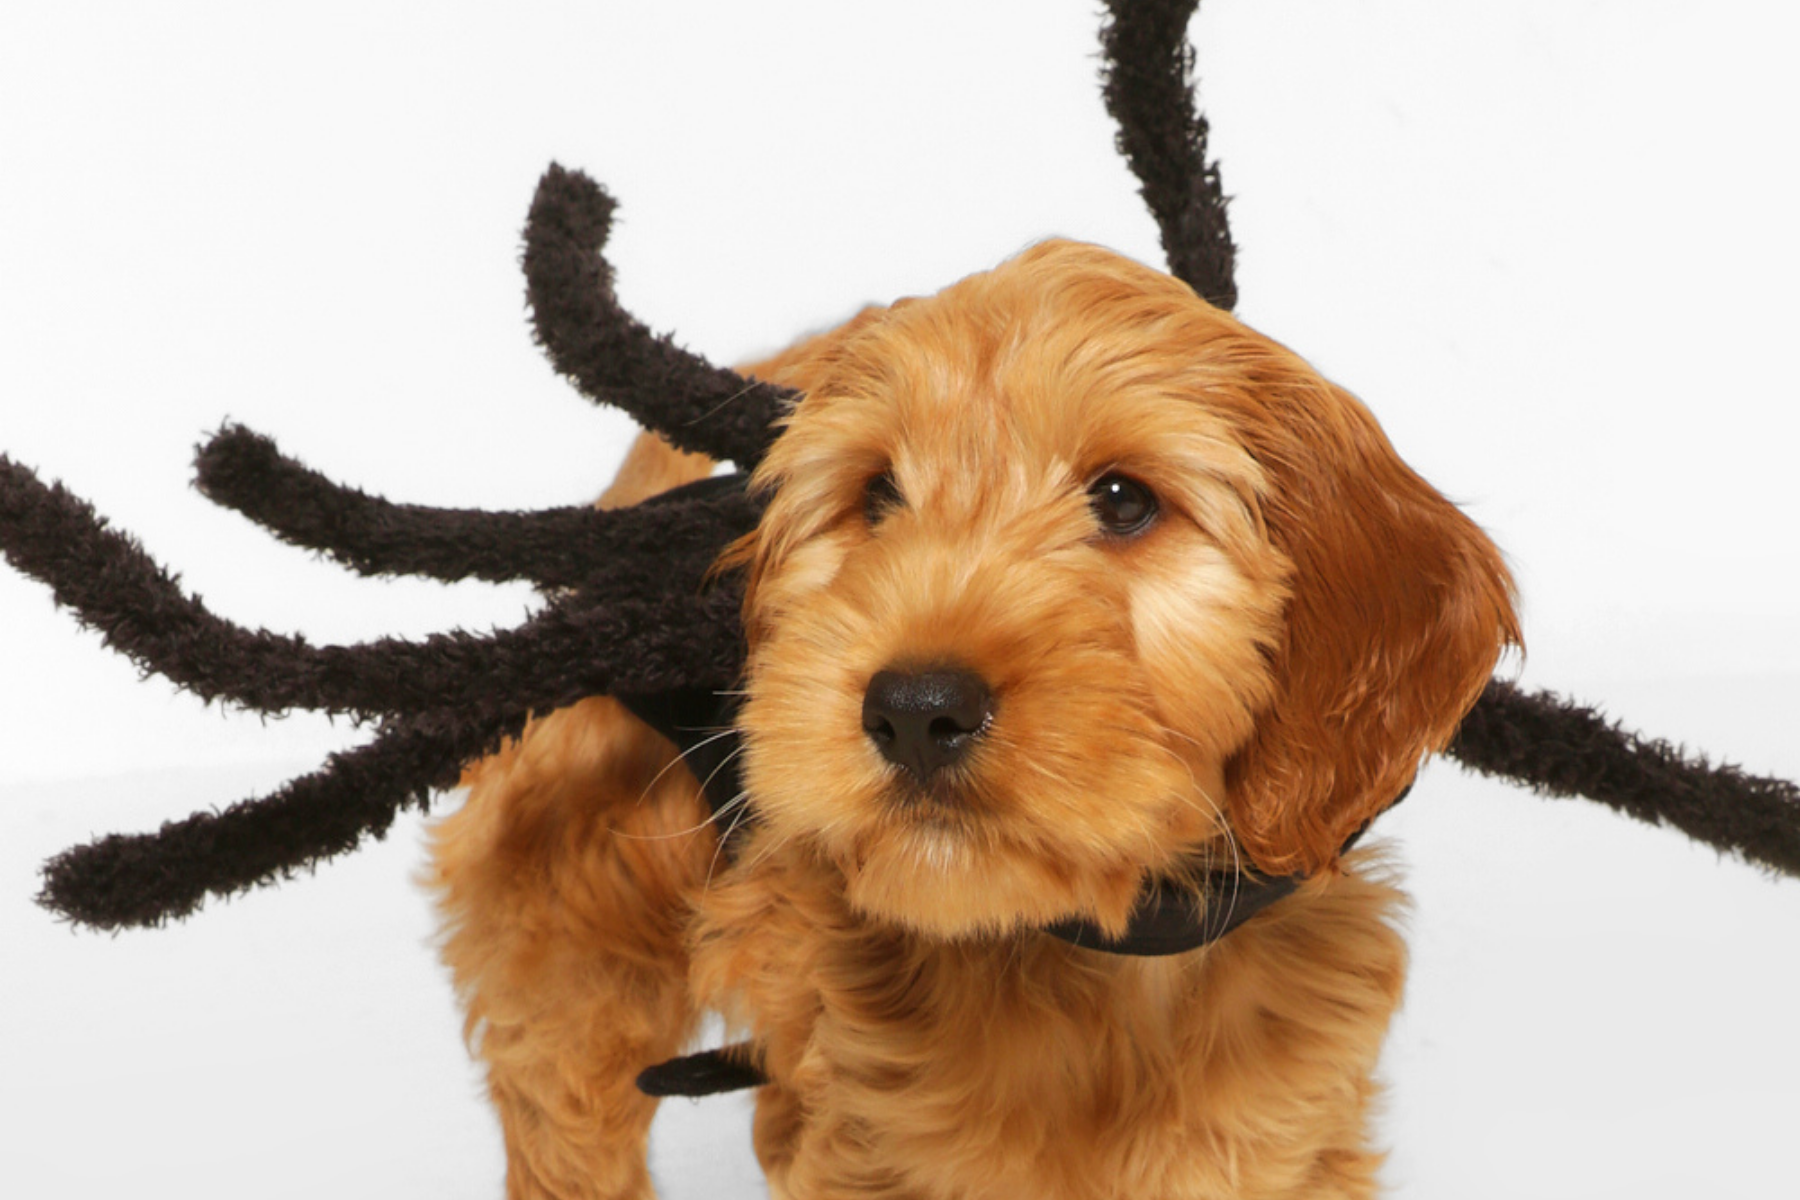 6 Halloween costume ideas for your dog